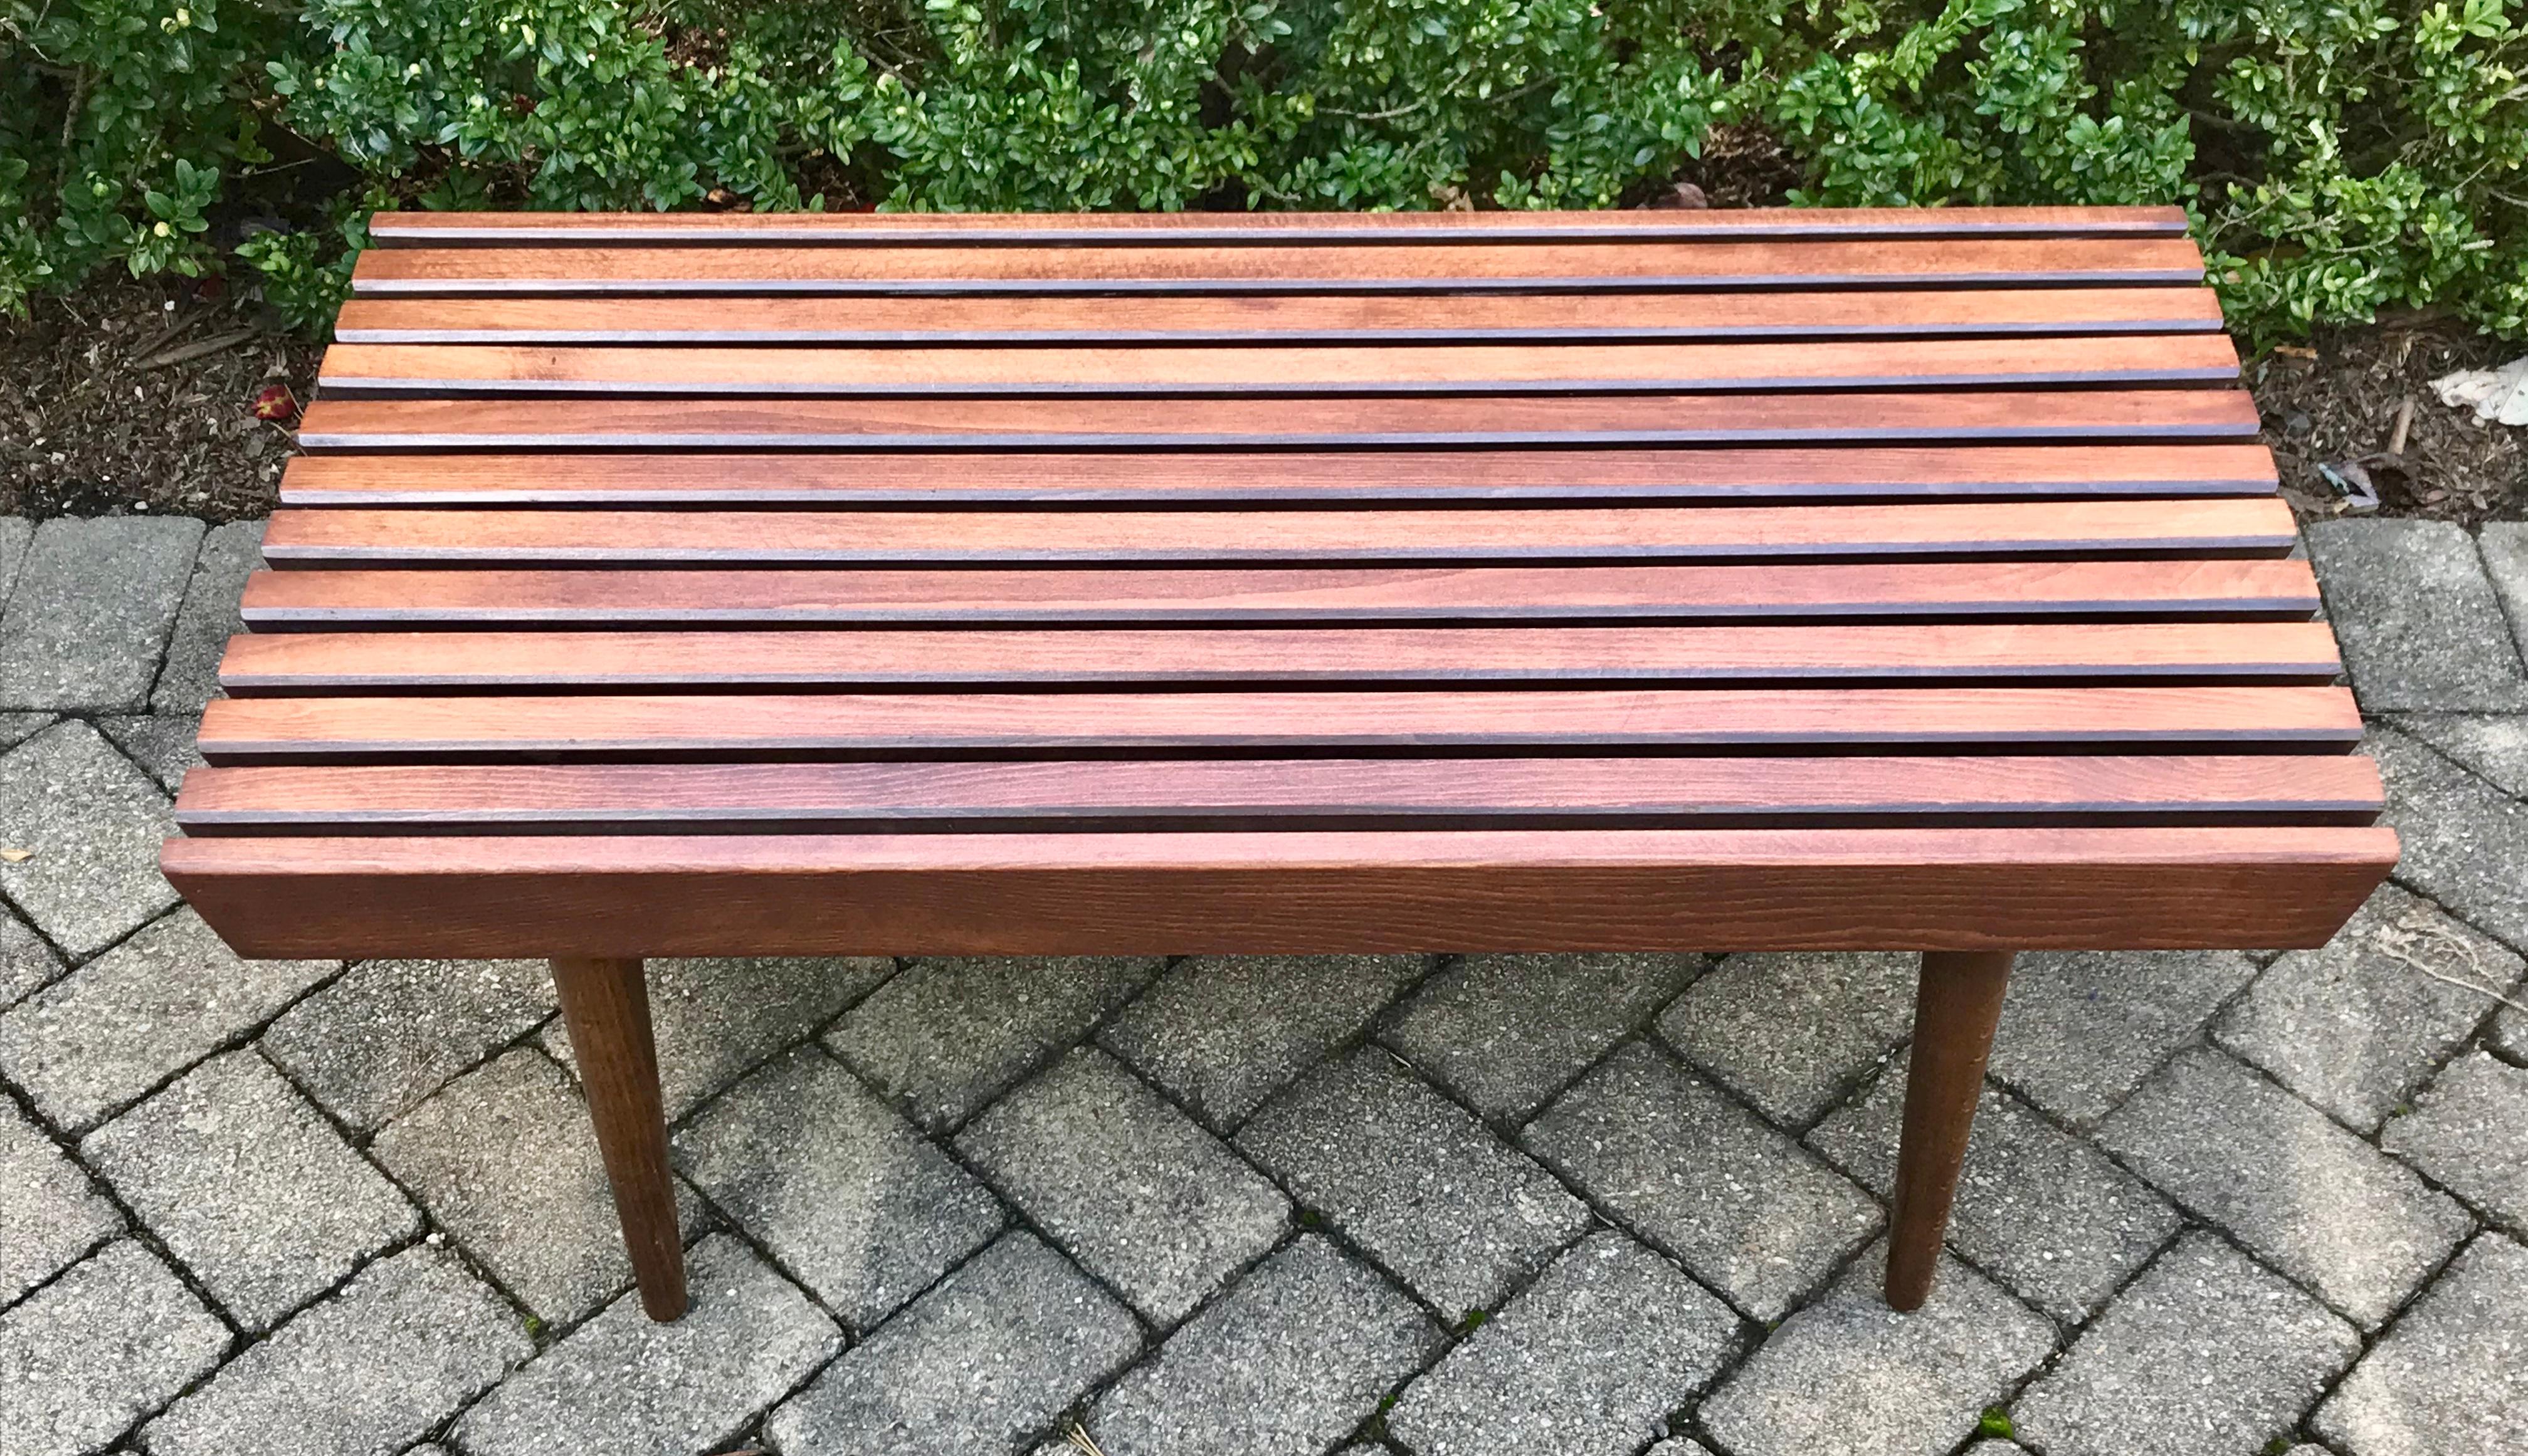 Very sharp slat bench in the style of George Nelson. Very functional as a coffee table or side table. Professionally restored.